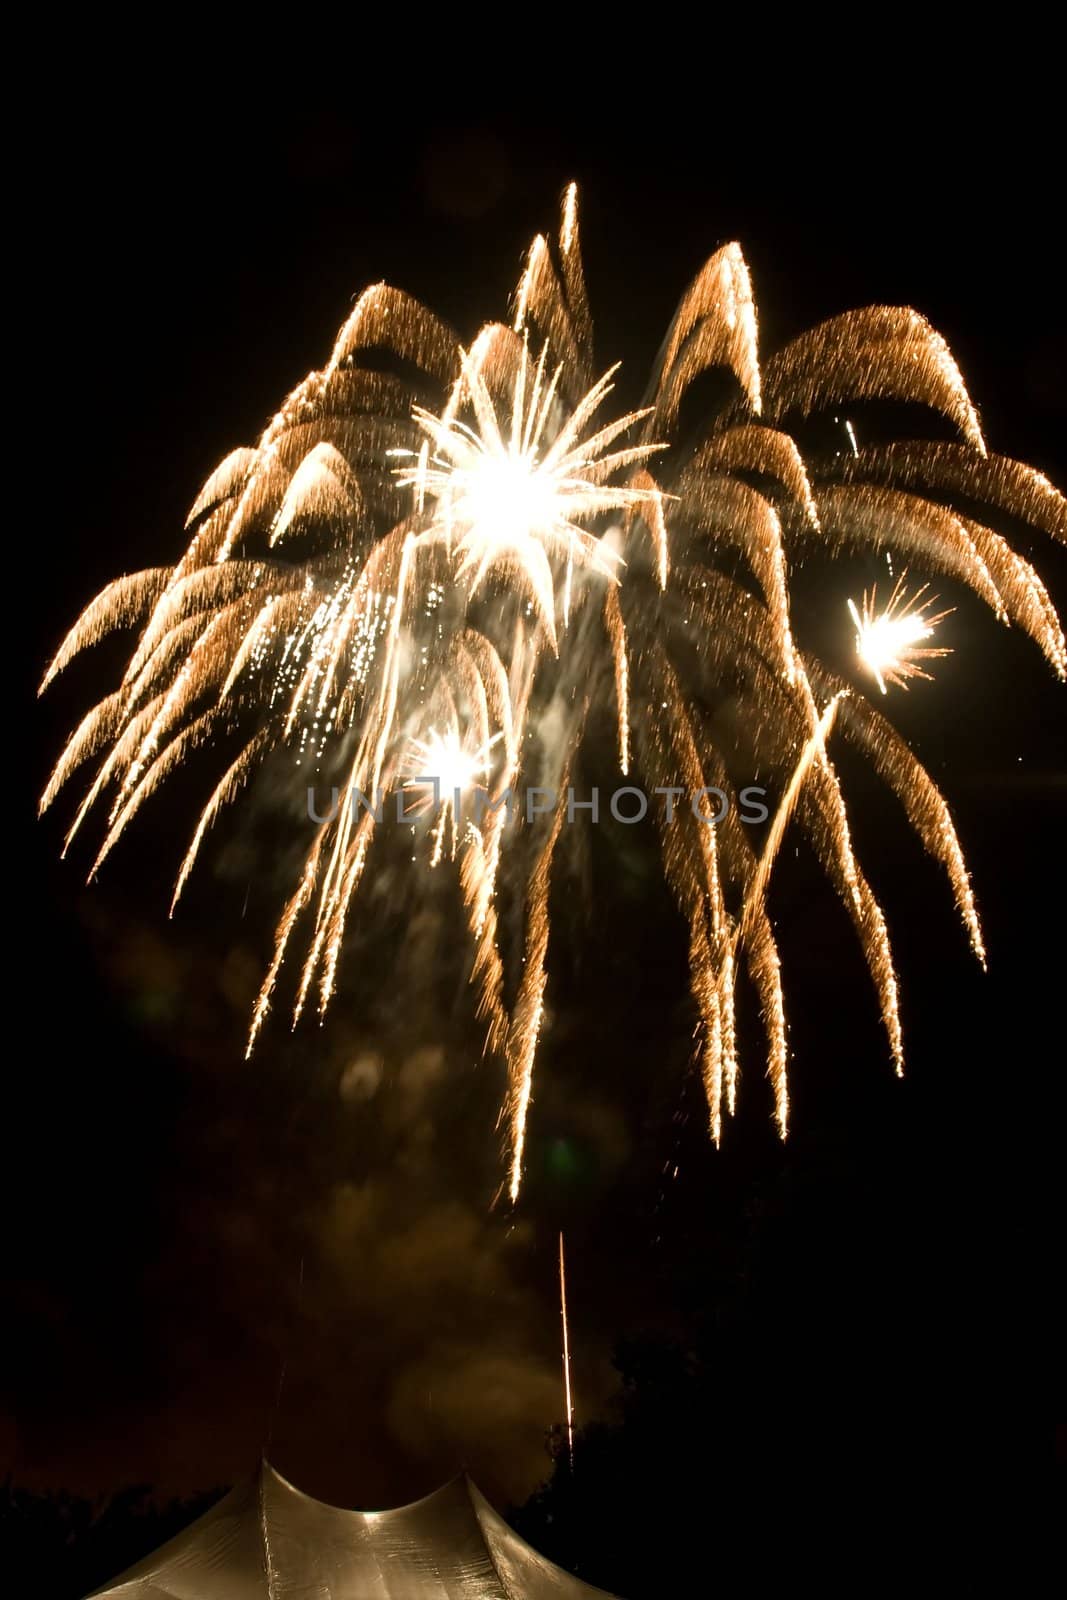 4th of July fireworks over San Jose, California